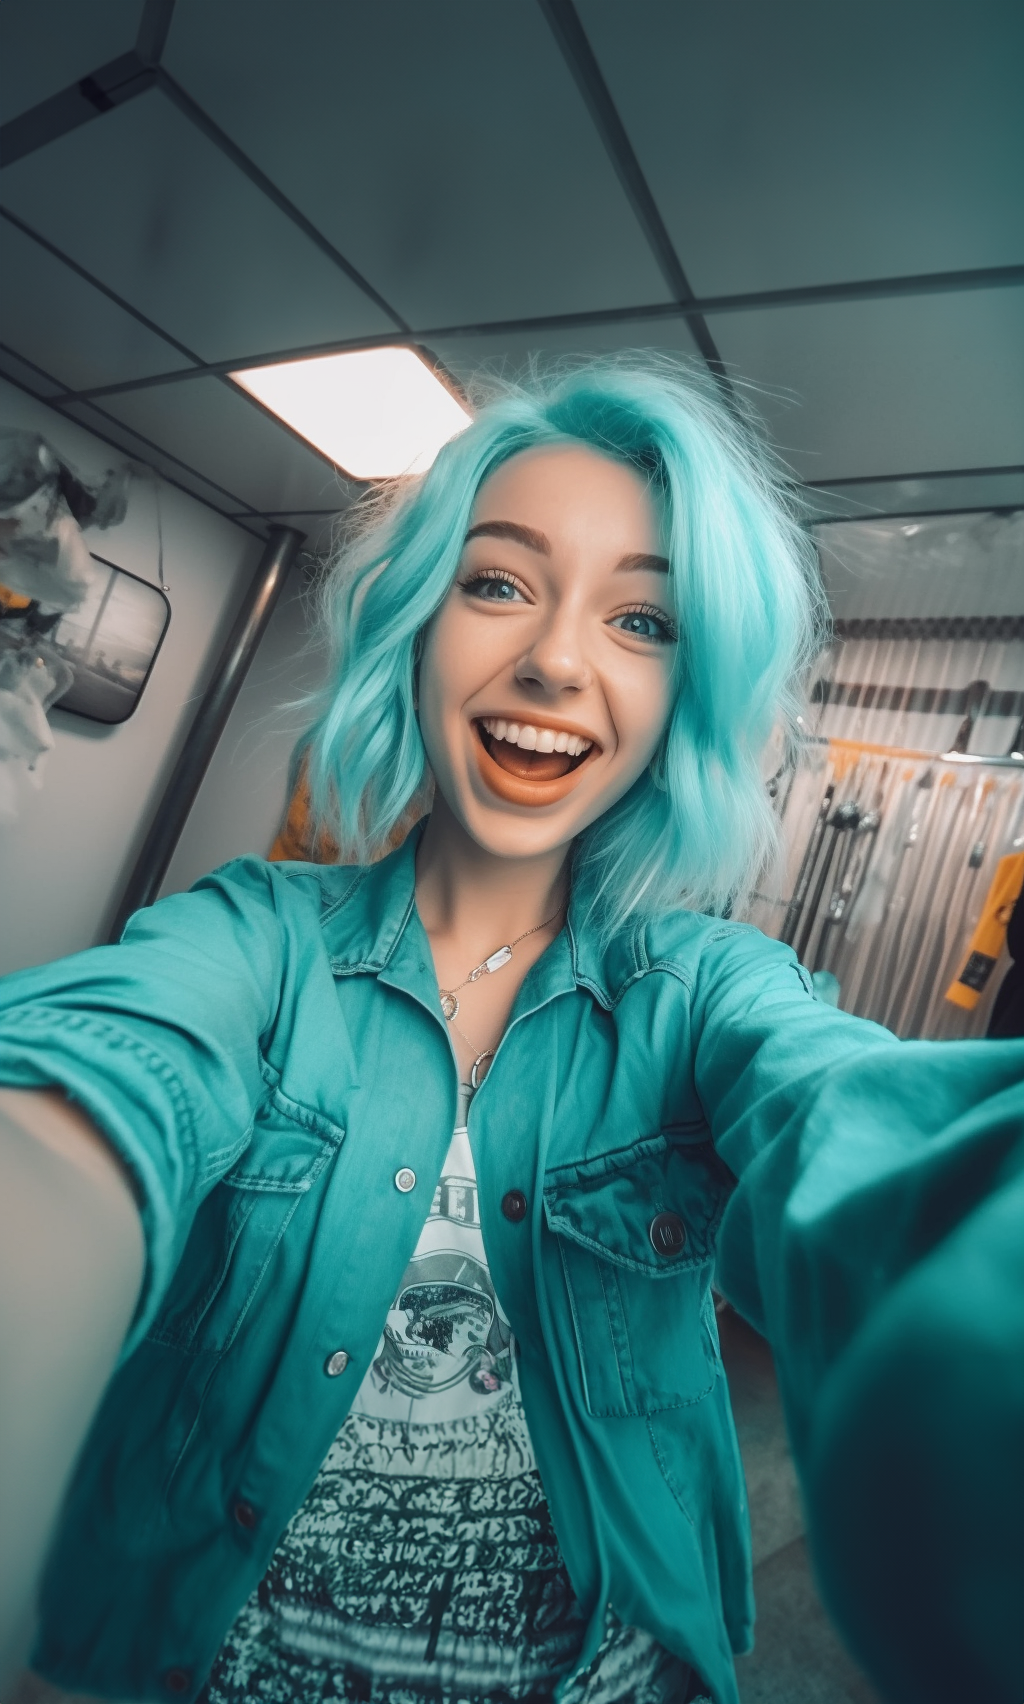 https://viralsound.com/images/ai/blue-girl-in-teal.png